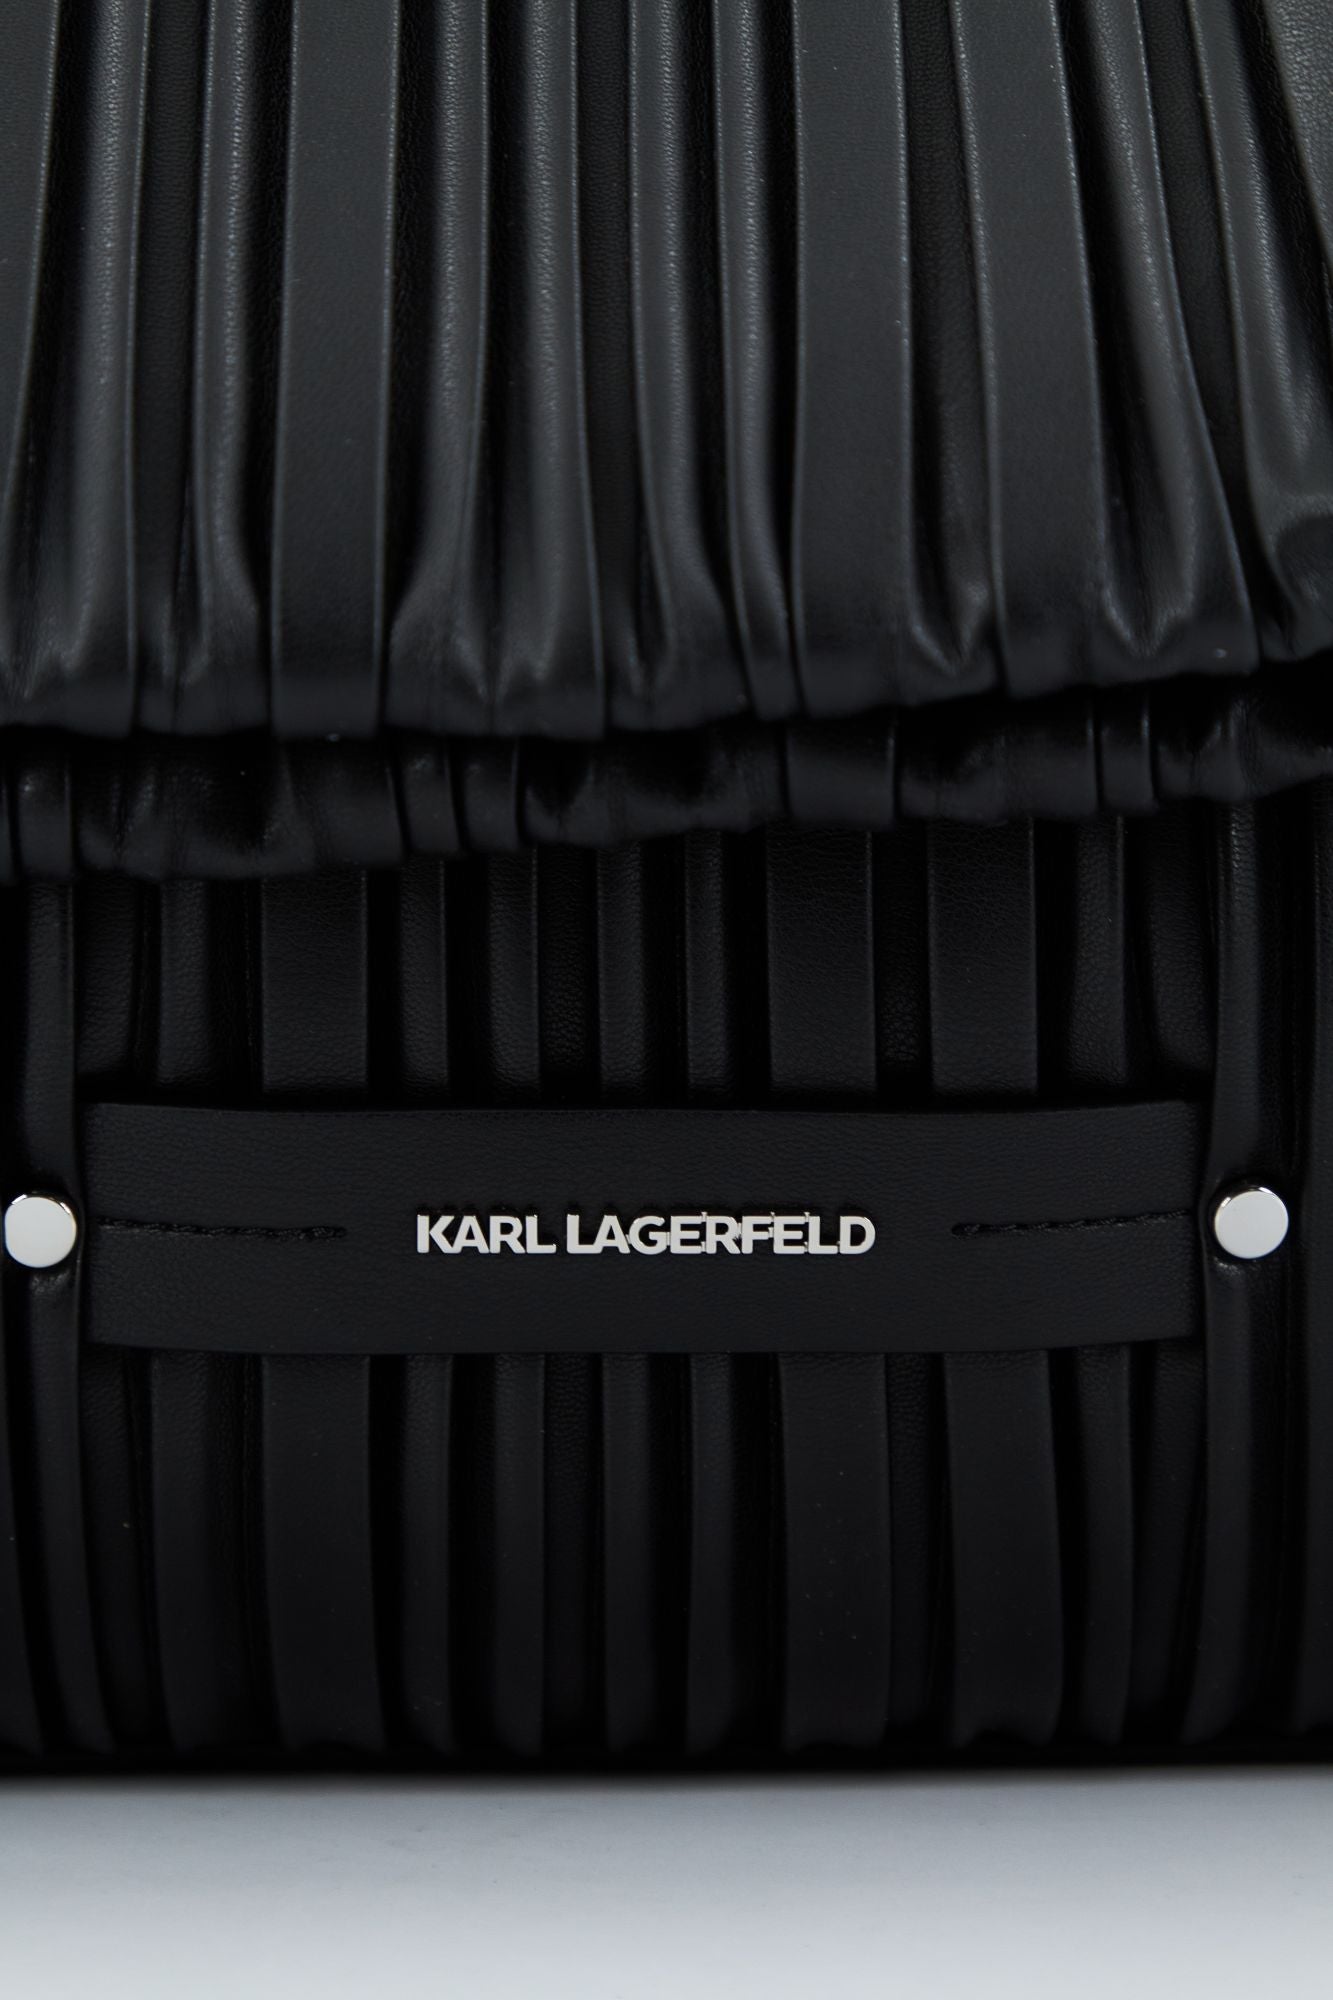 KARL LAGERFELD K/KUSHION CHAIN MD FOLD TOTE en color NEGRO (4)